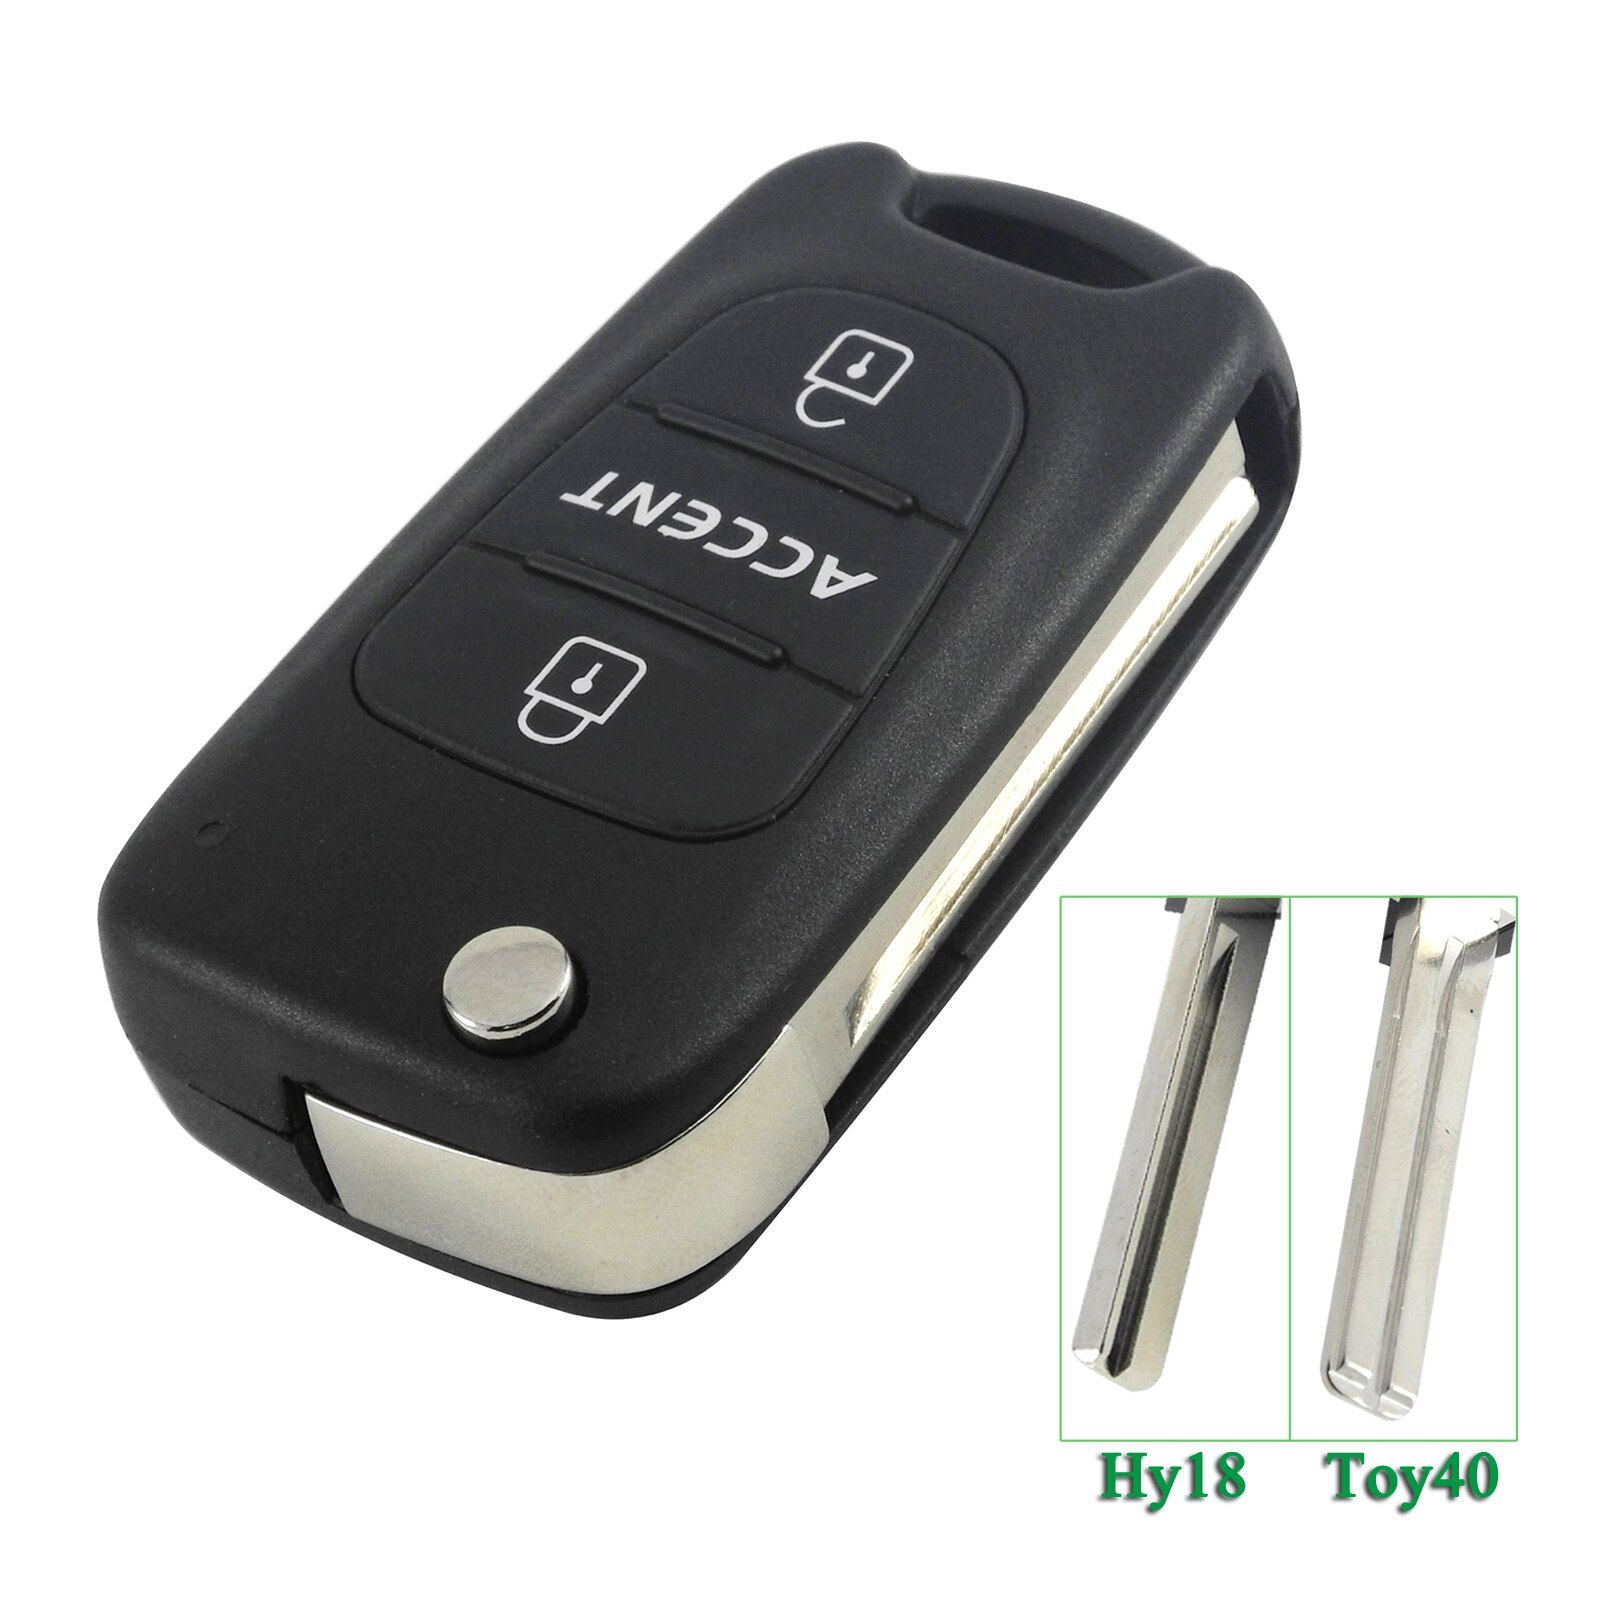 Bilchave 10psc 3BT HY18/TOY40 Blade Flip Folding Remote Key Shell Fob Voor Hyundai Accent Keyless Entry Cover Auto alarm Behuizing